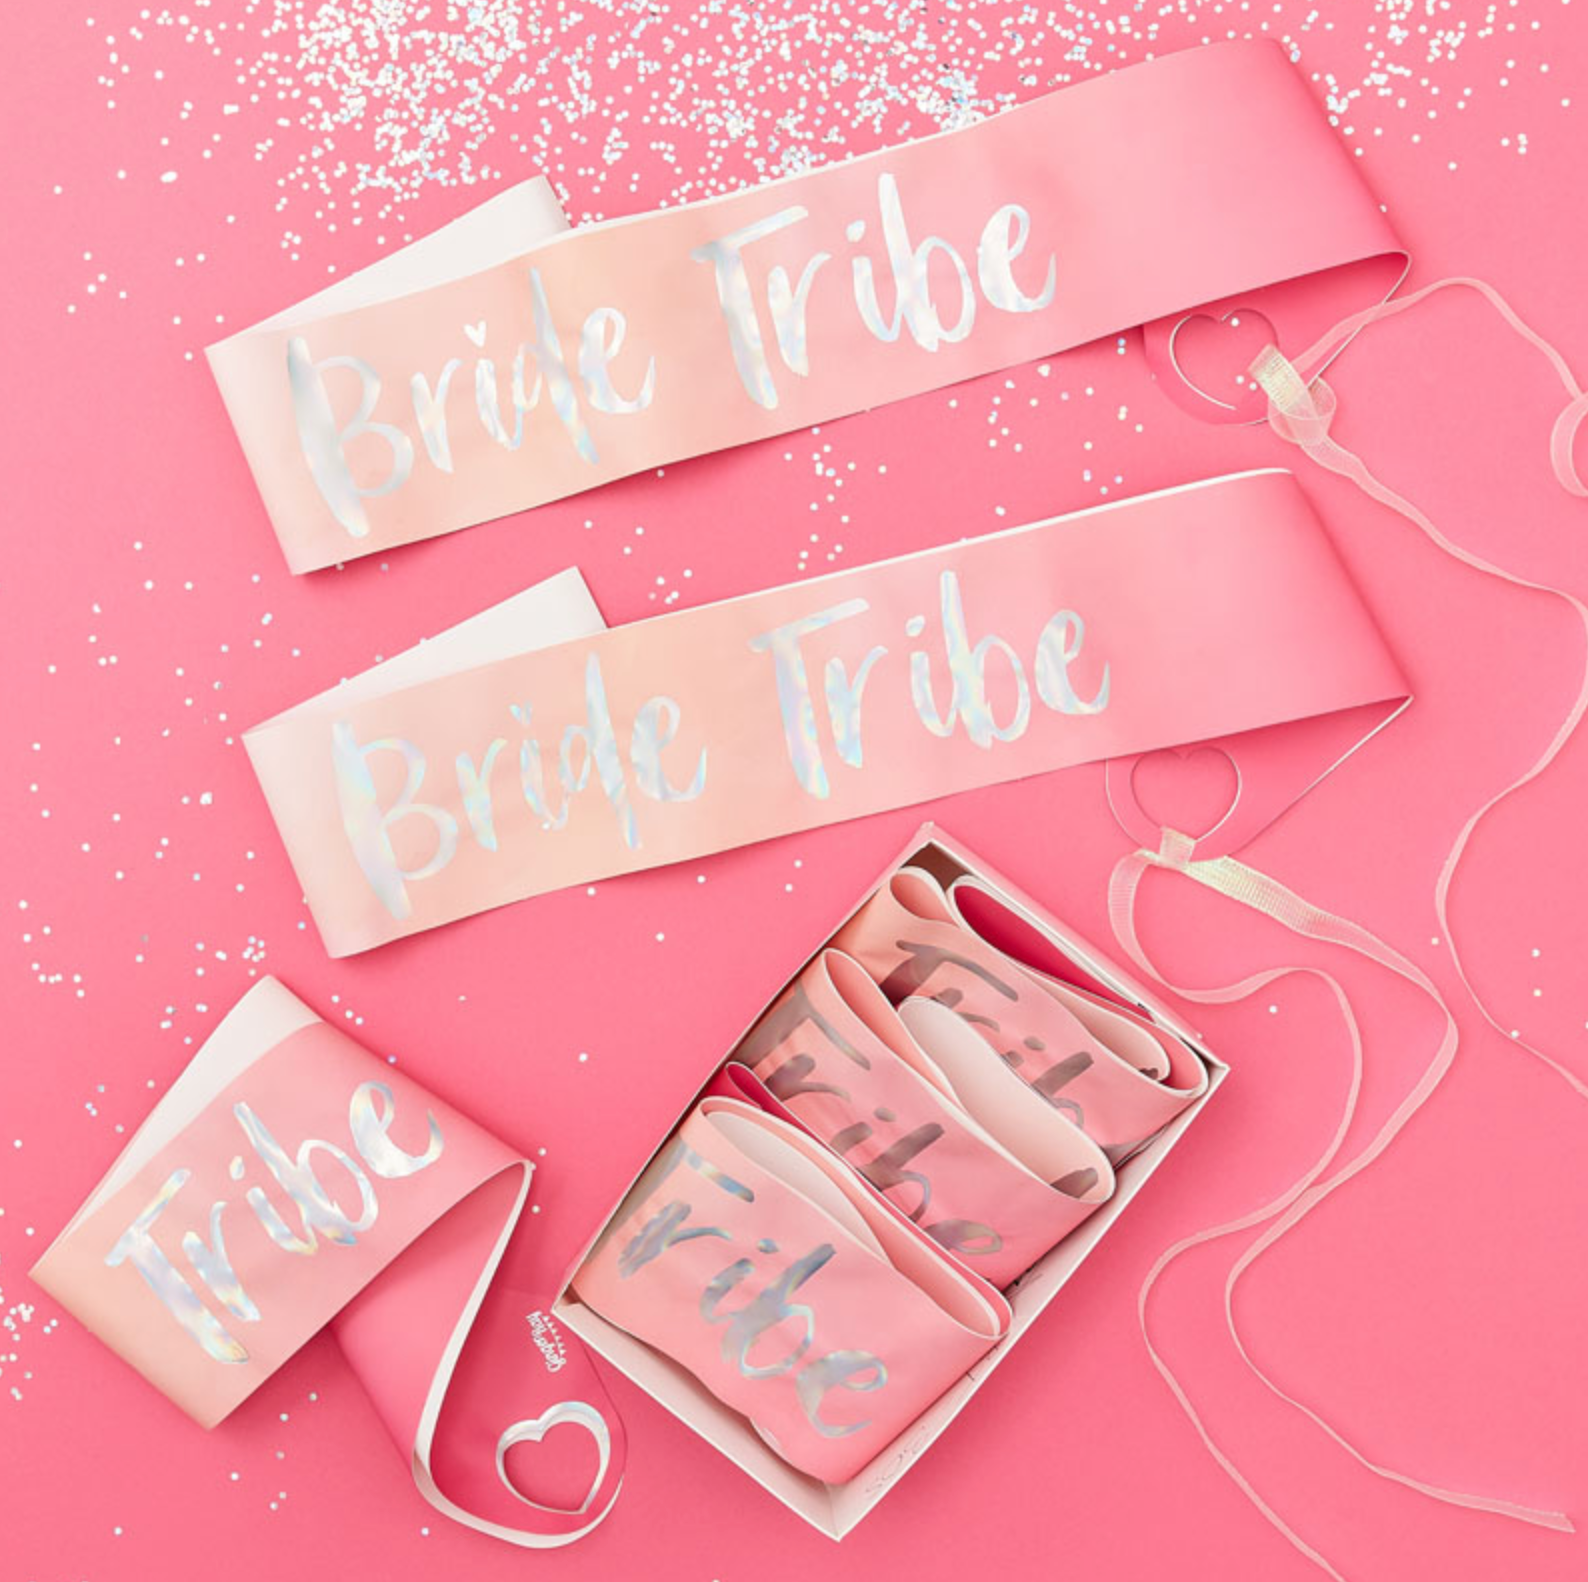 Bride Tribe - Iridescent Bride Tribe Sashes (6 Pack)